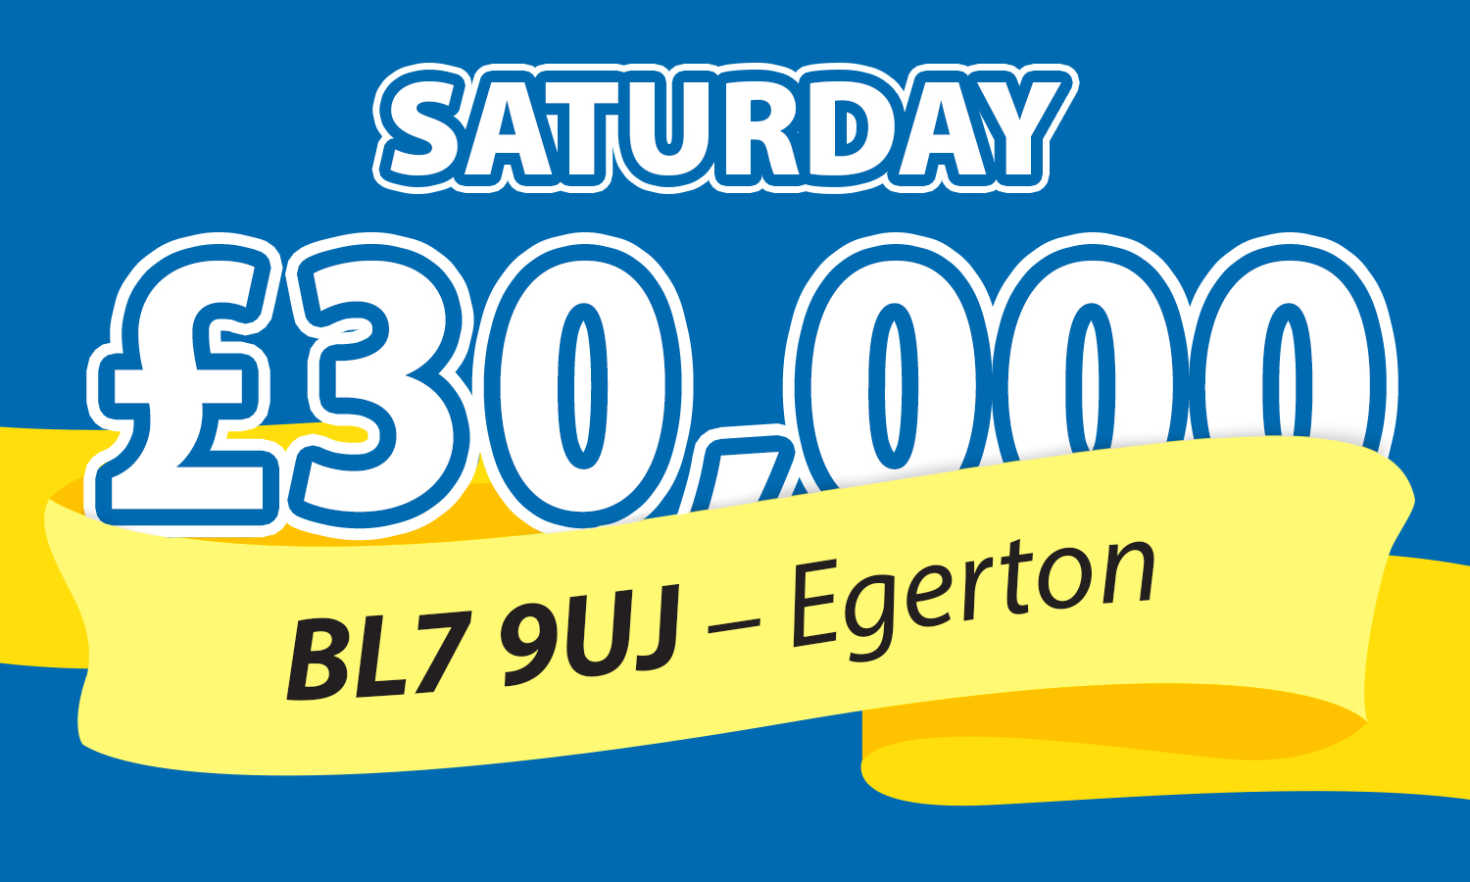 One player from Egerton was the winner of the Saturday Street Prize today